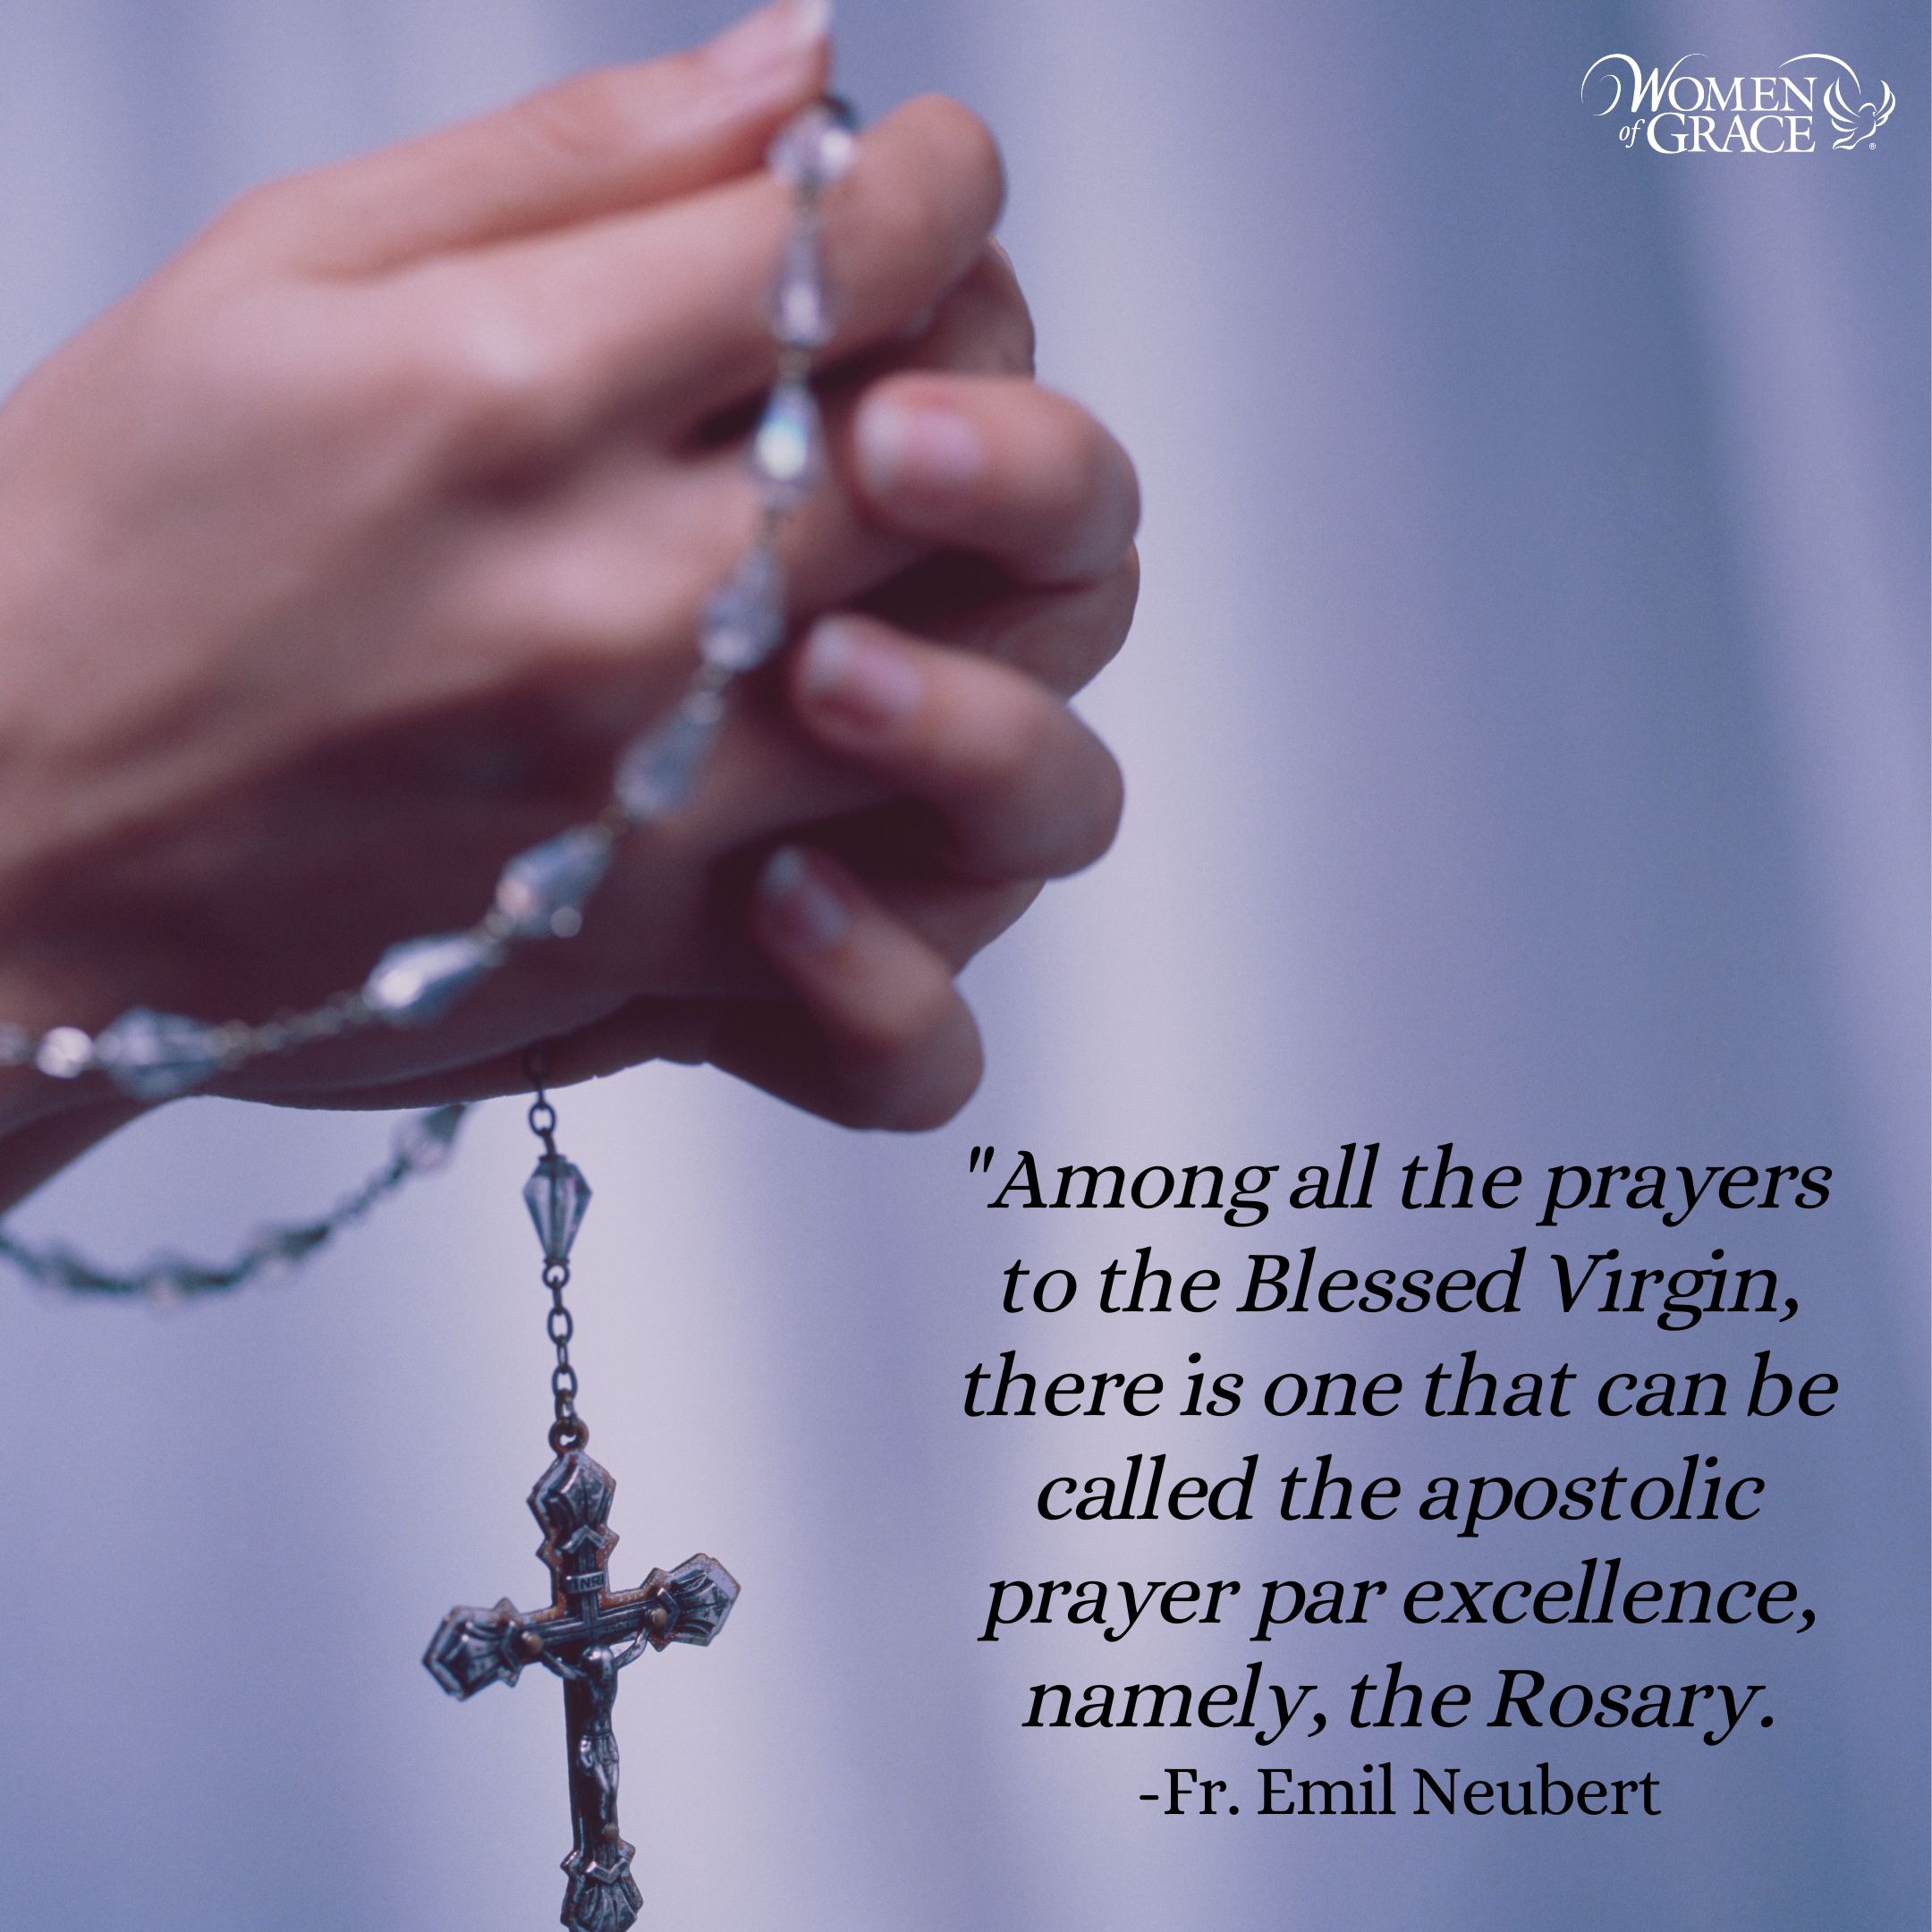 Pray The Holy Rosary Daily - SEPTEMBER 29 IS THE FEAST OF